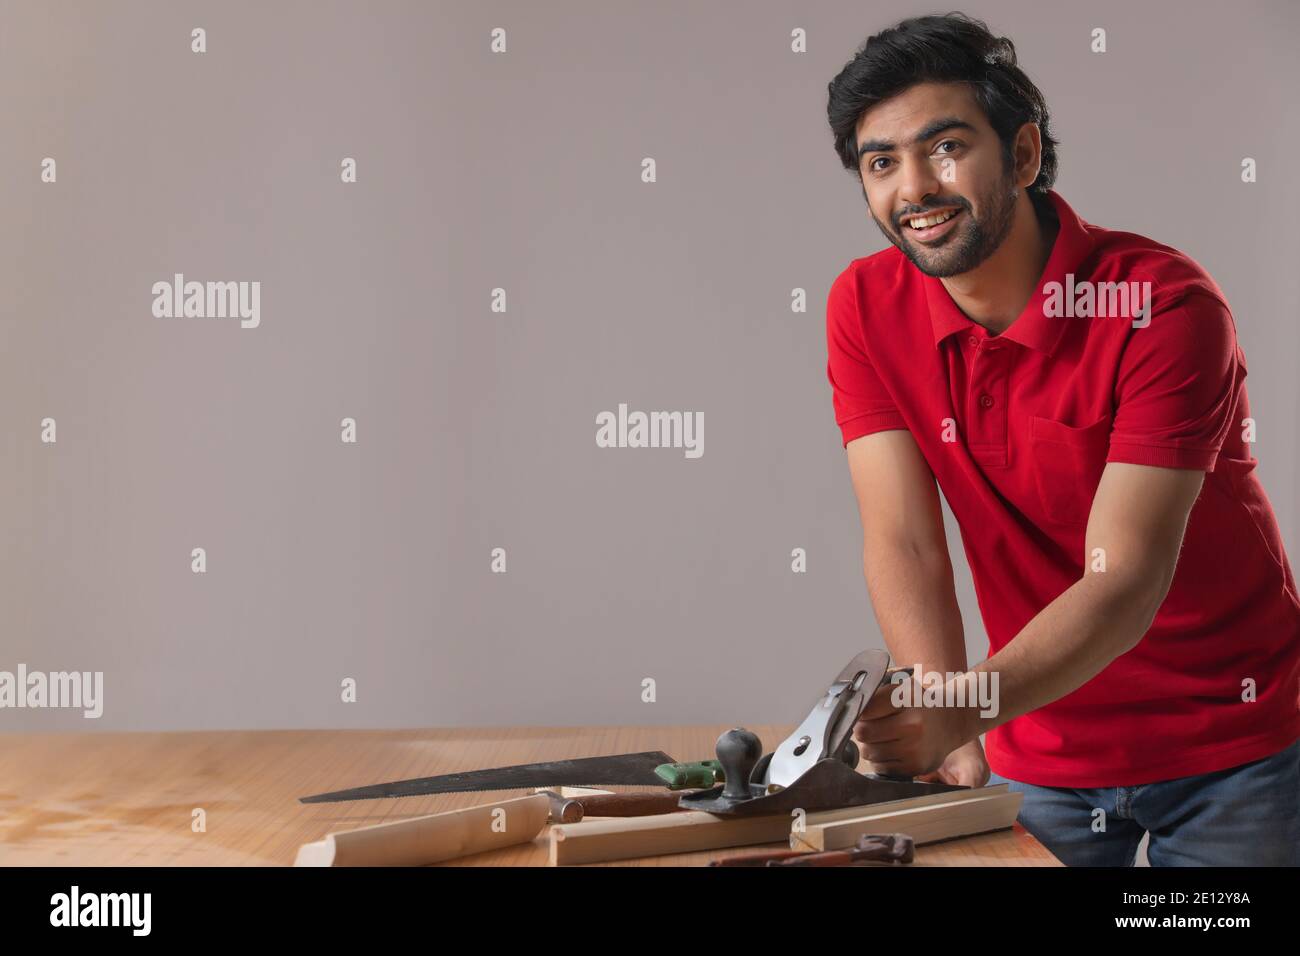 A YOUNG CARPENTER SMILING AT CAMERA WHILE WORKING Stock Photo